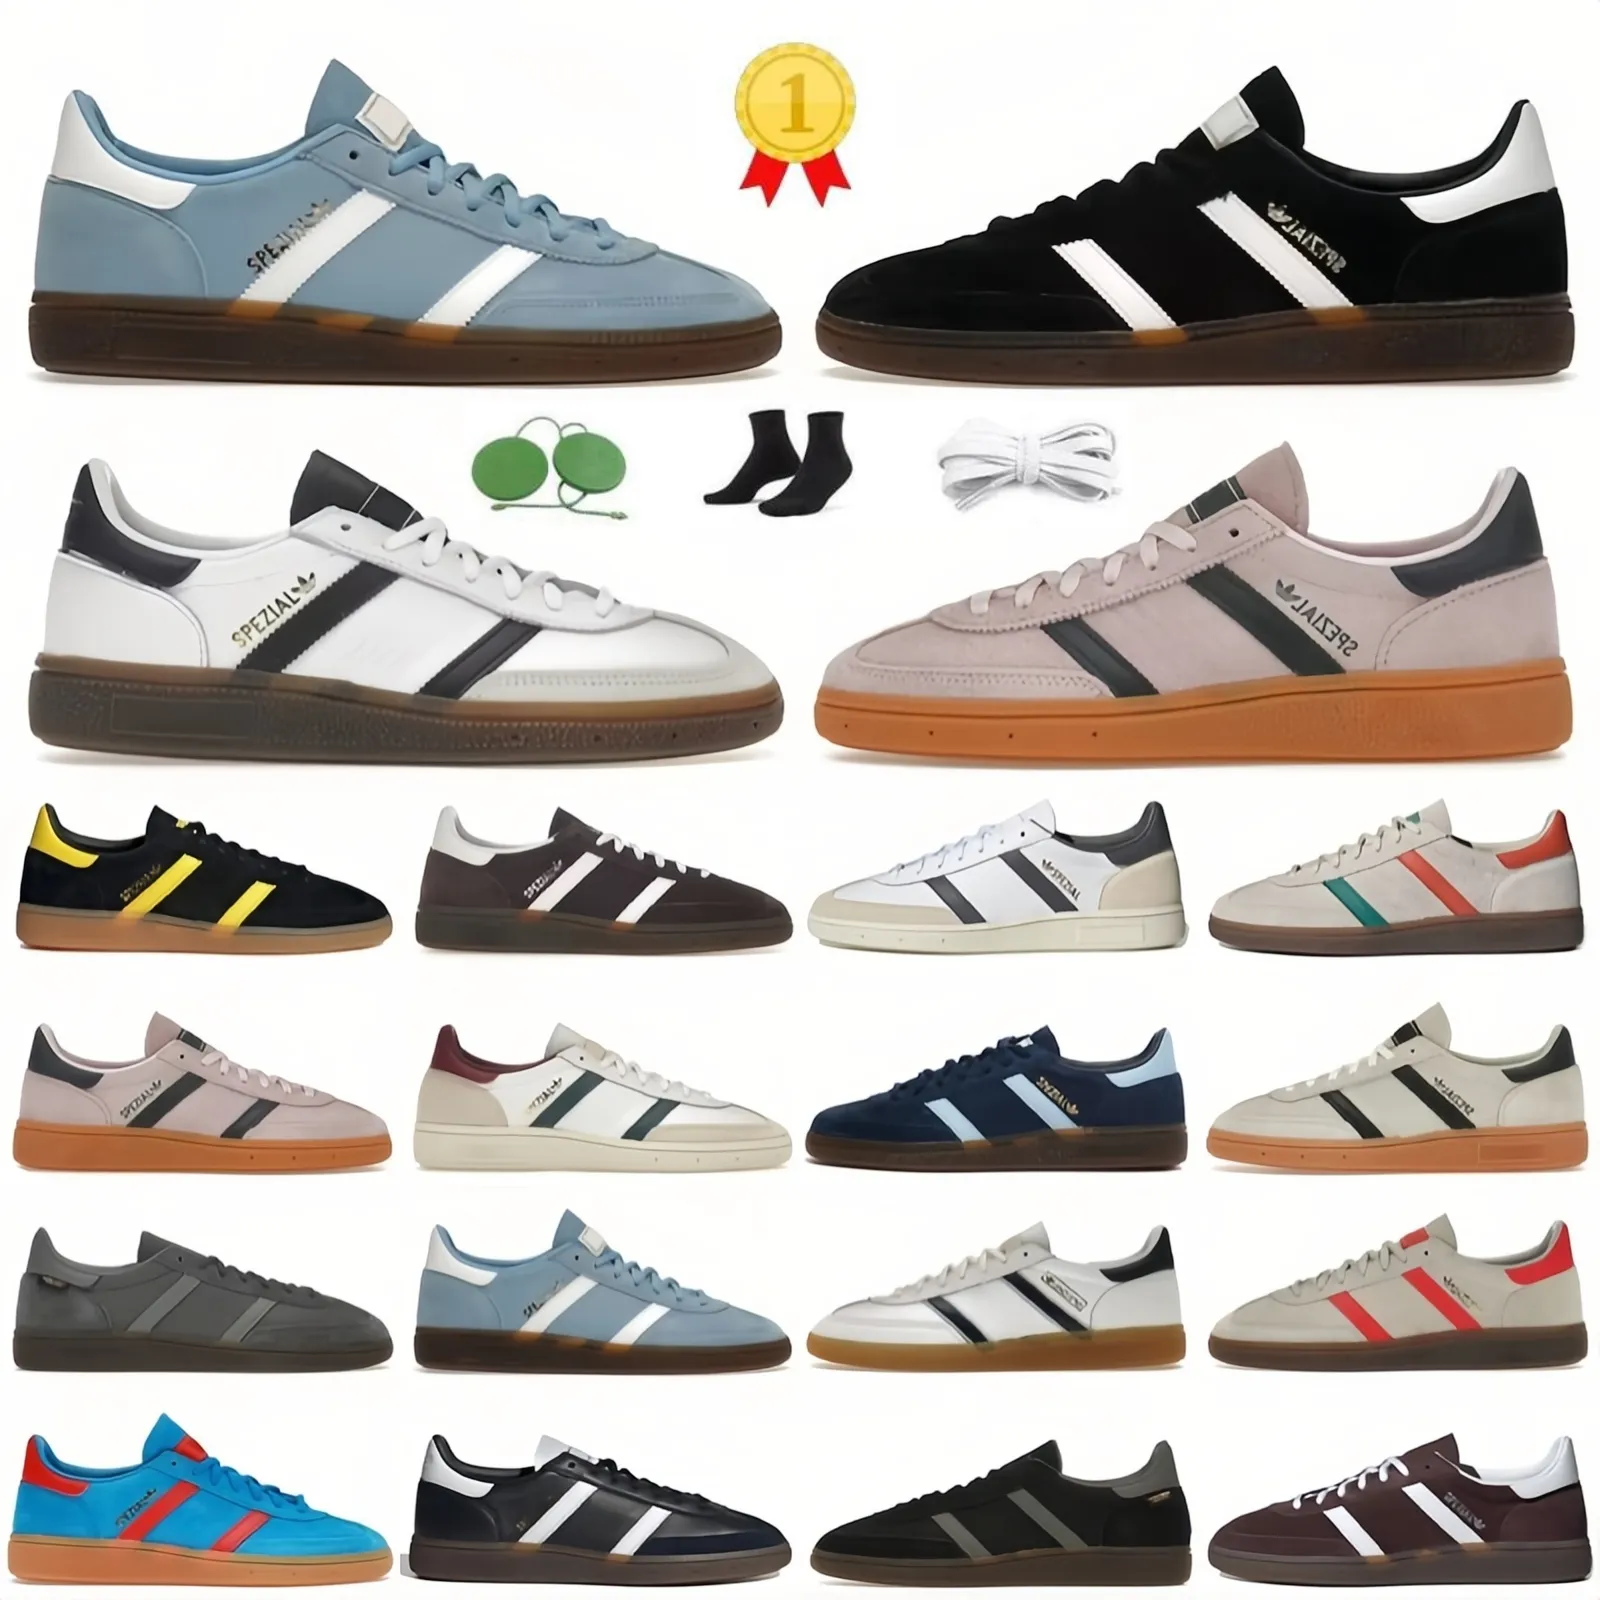 Handball Spezial Aluminum Core Black Clear Pink Arctic Night Casual Shoes Men Women Bright Light Blue Navy Gum White Shadow Brown Grey Sneakers